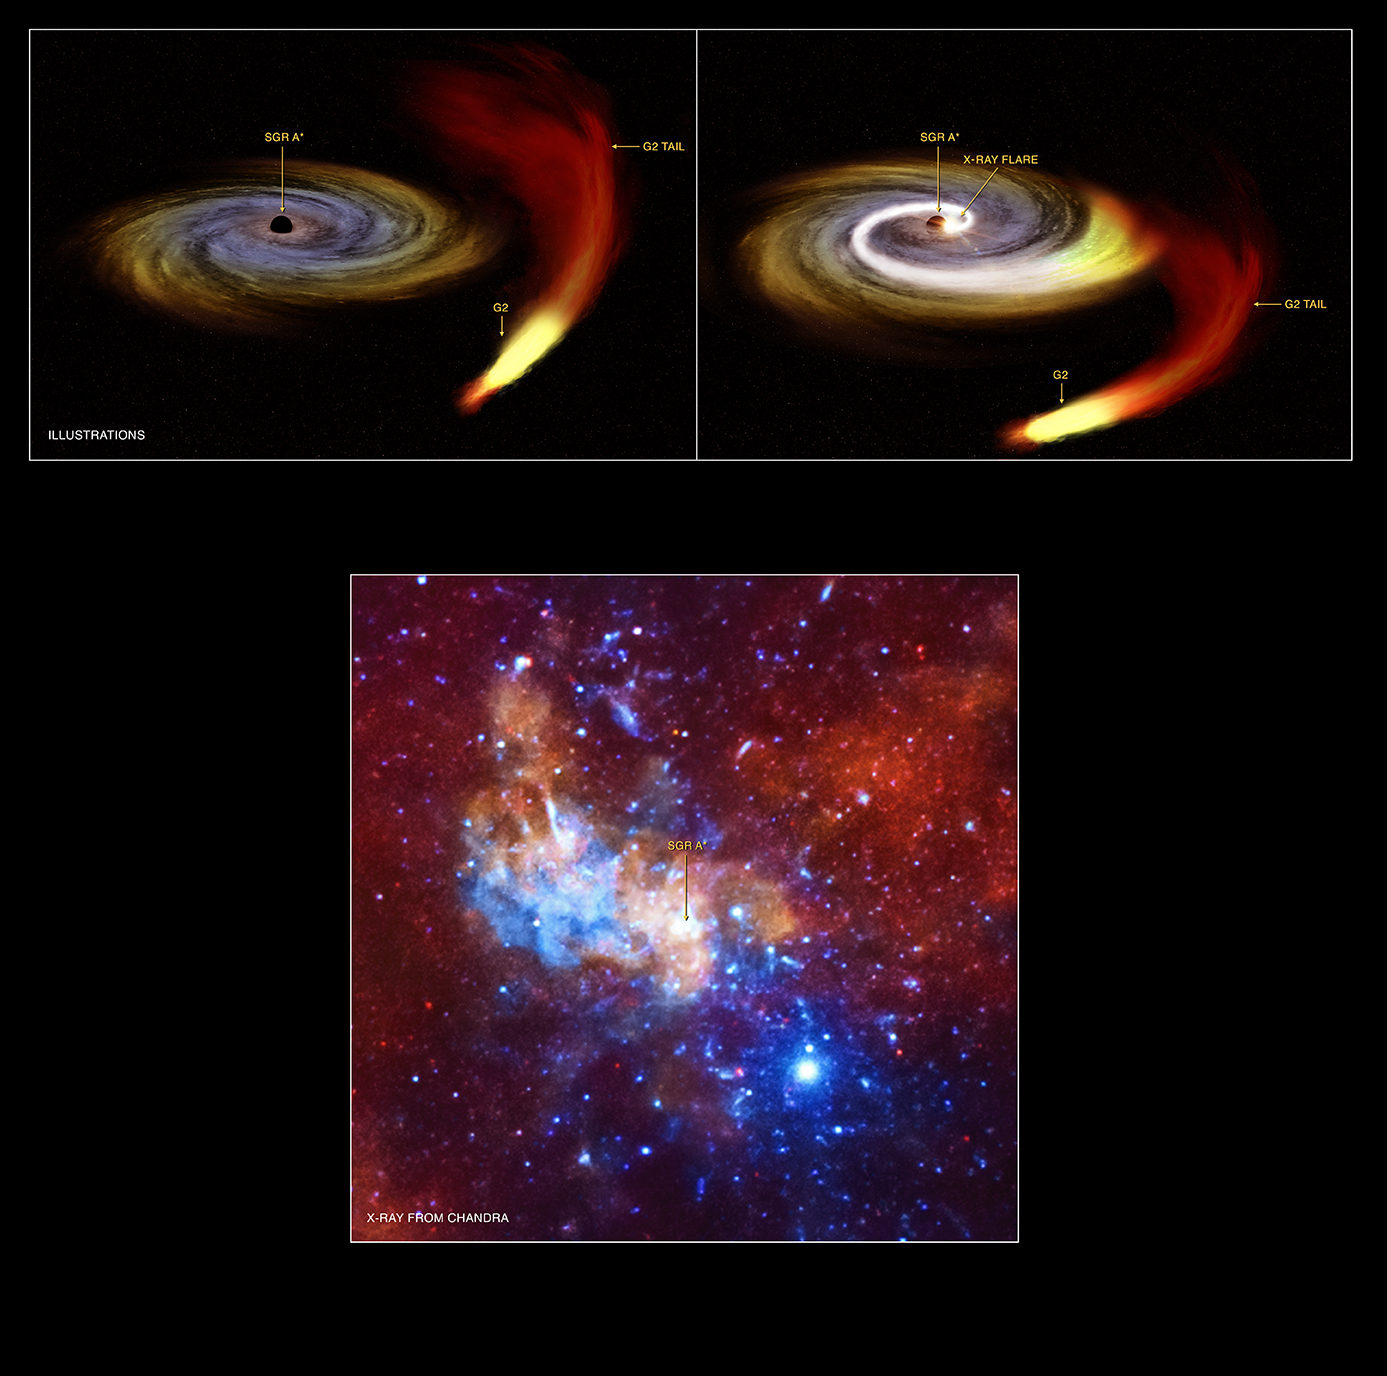 A long monitoring campaign of the Milky Way's supermassive black hole has revealed some unusual activity.